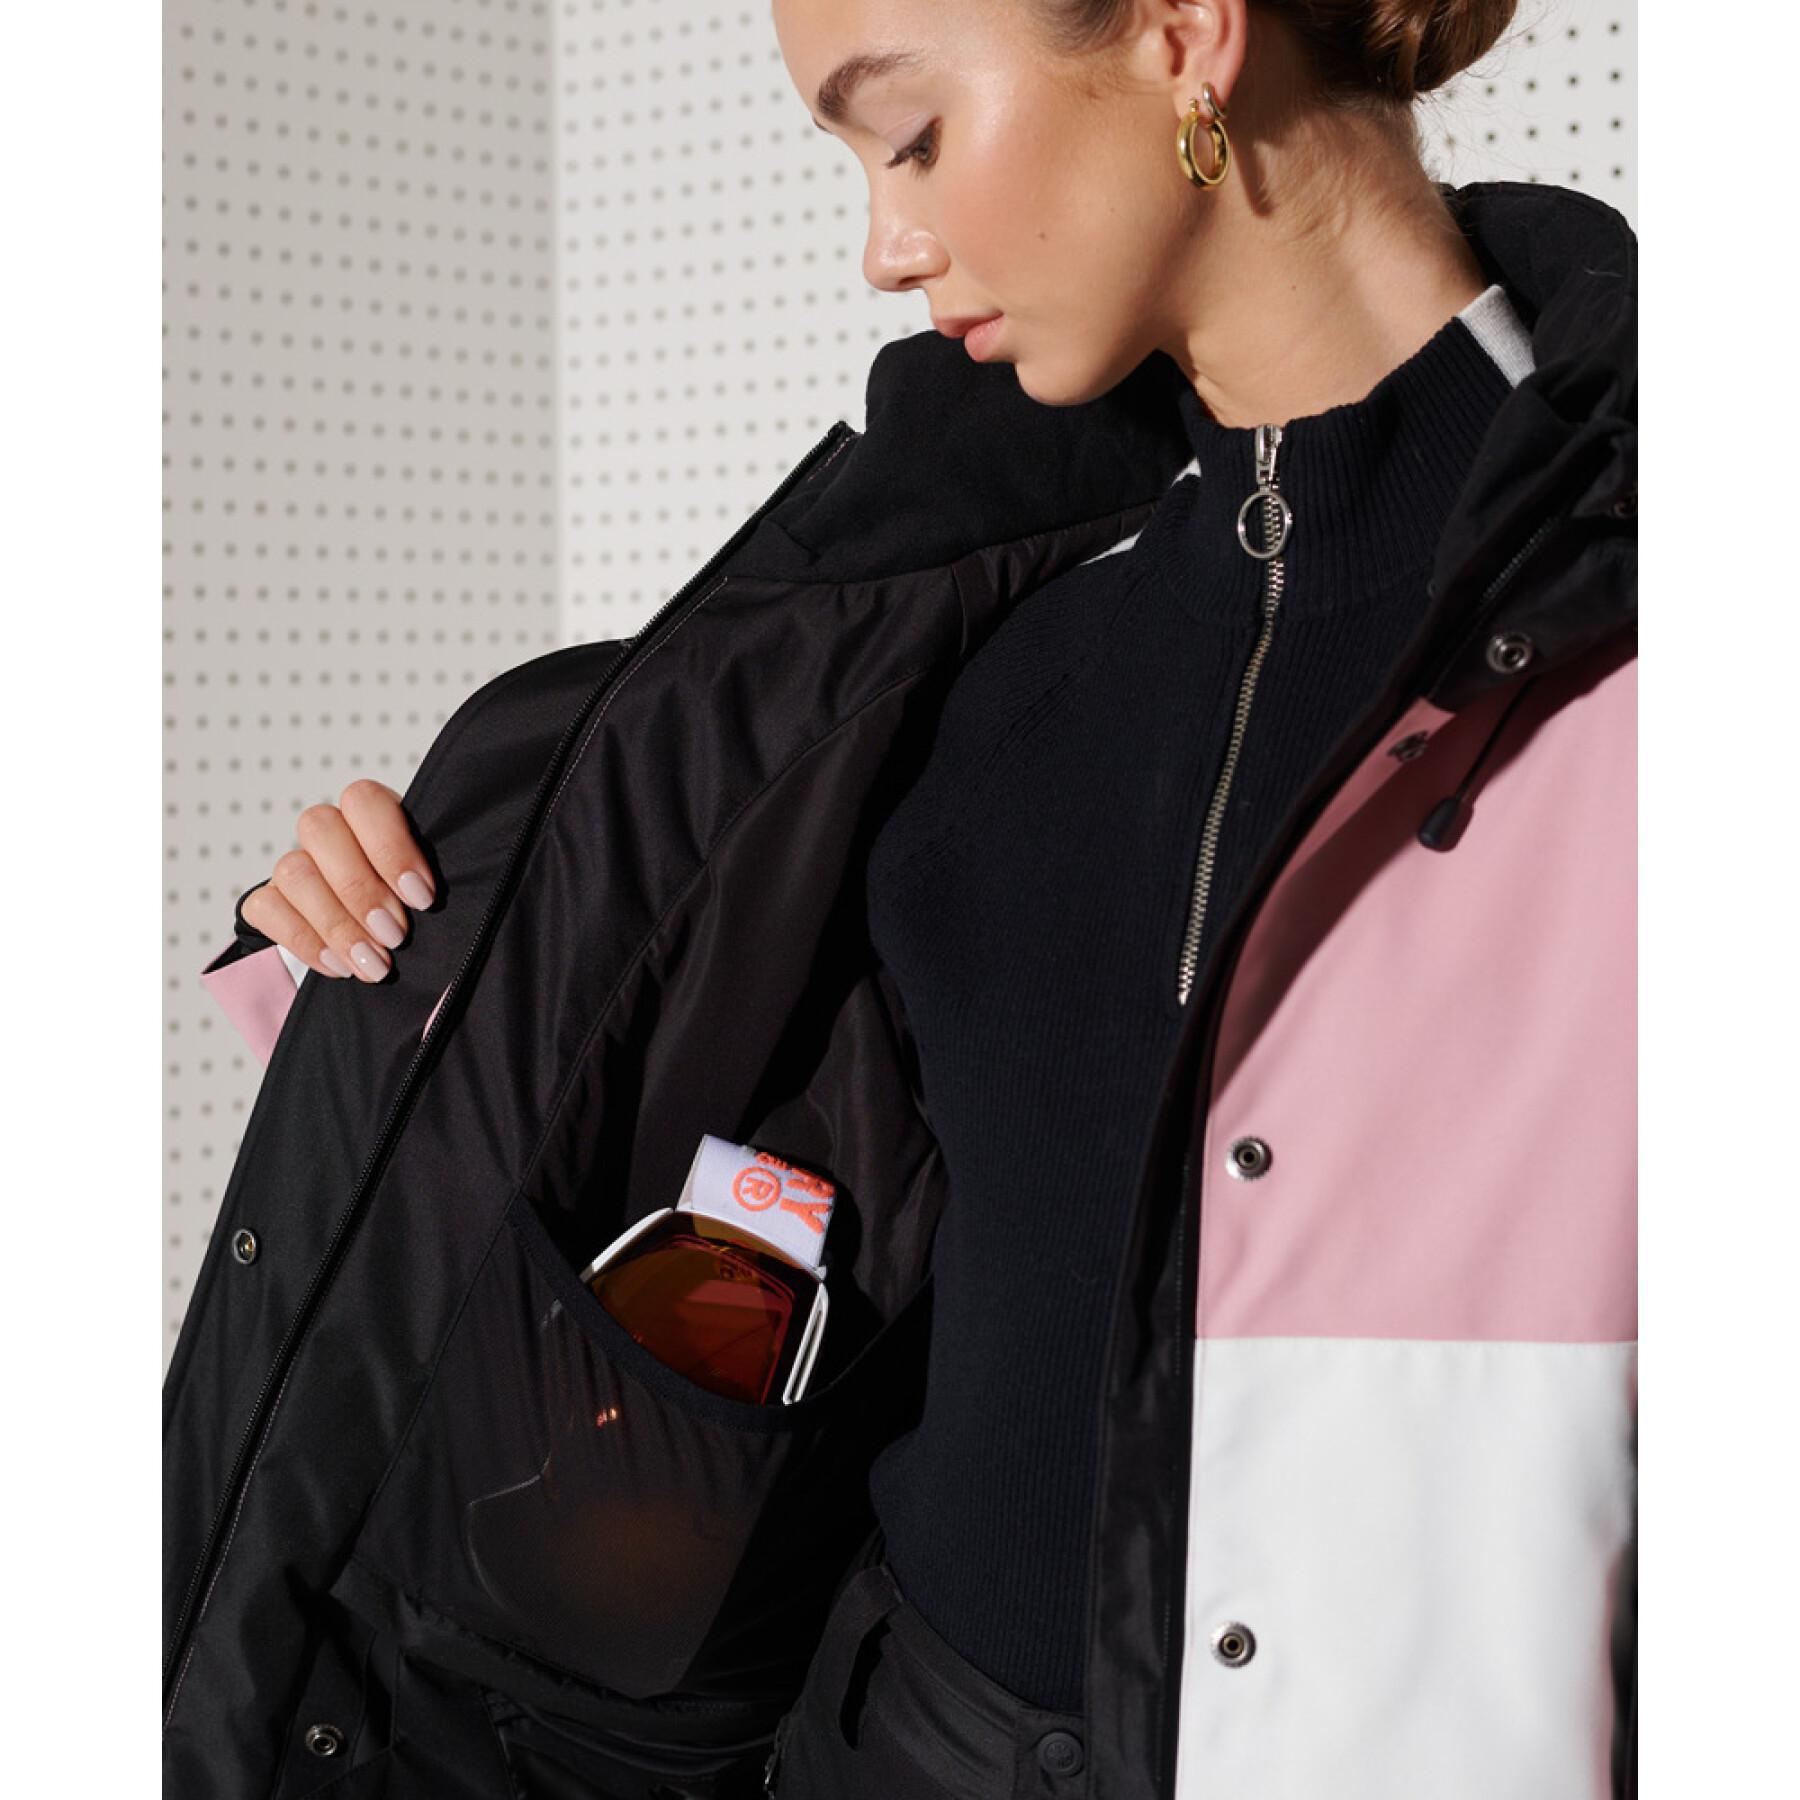 Women's jacket Superdry Freestyle Attack